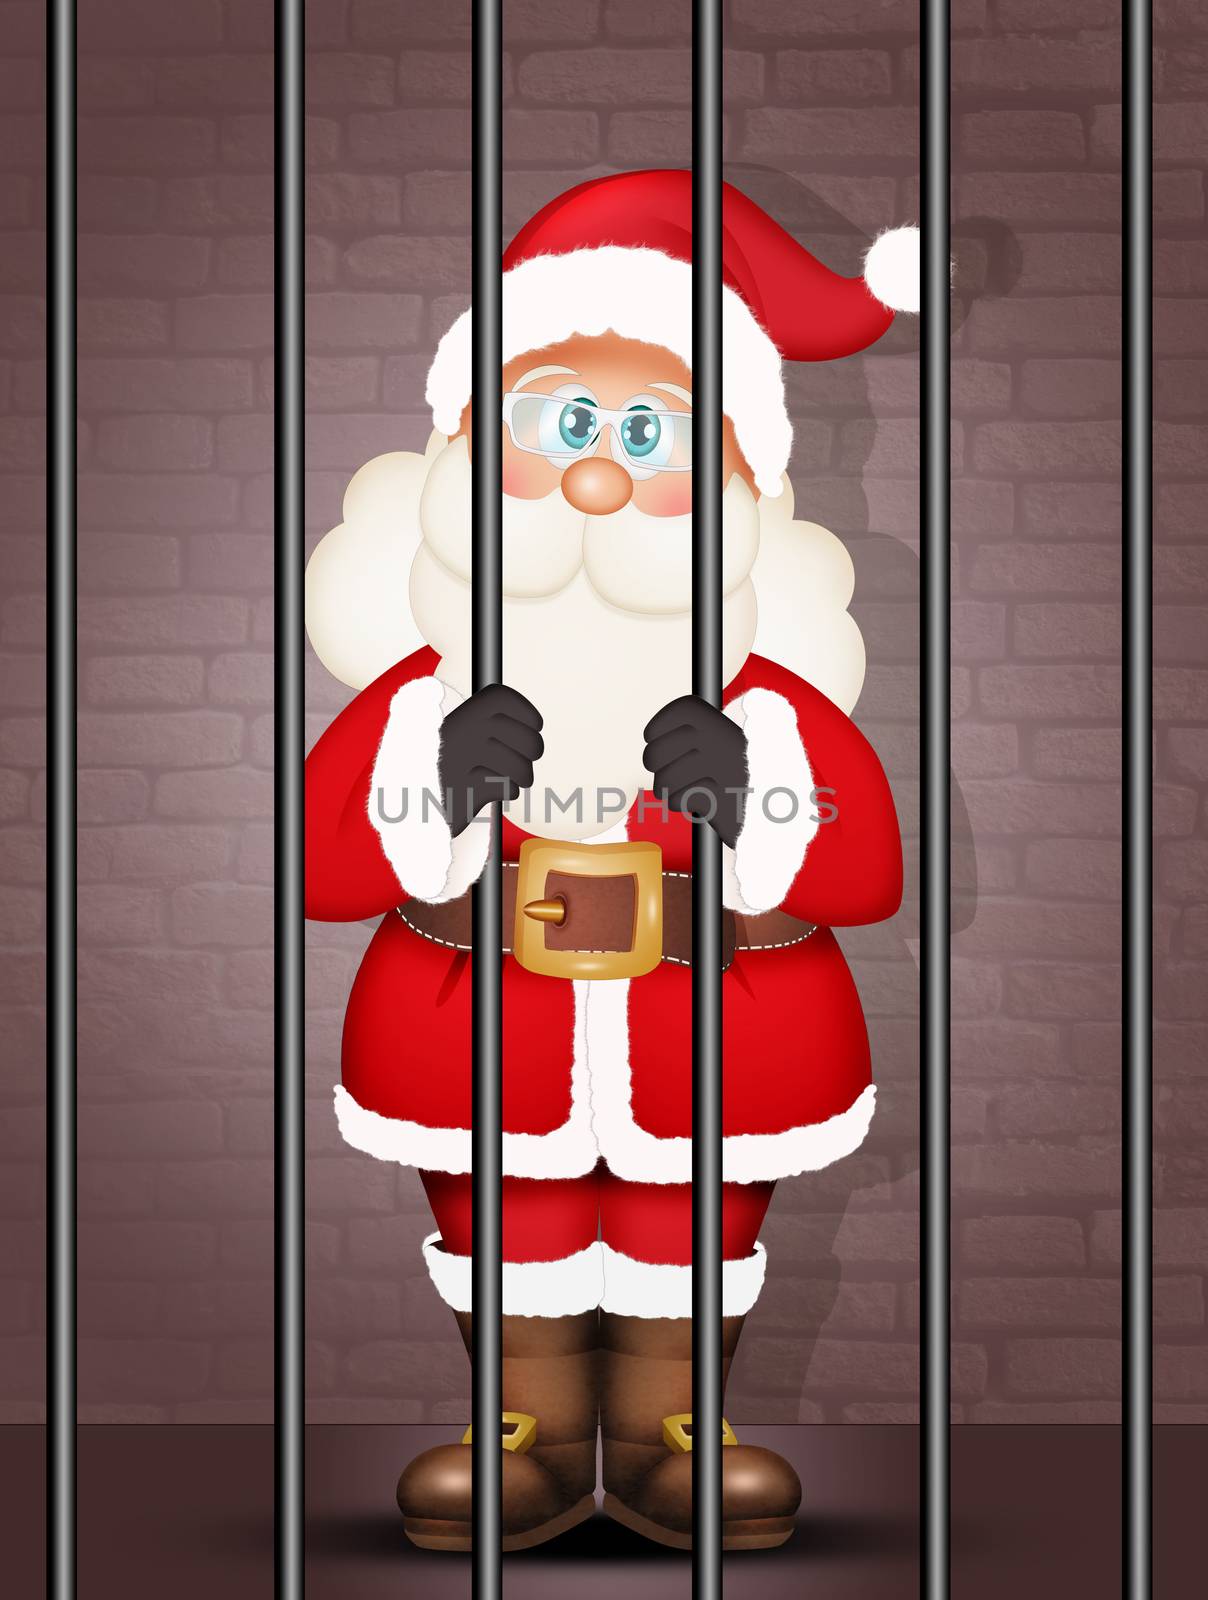 Santa Claus in prison by adrenalina